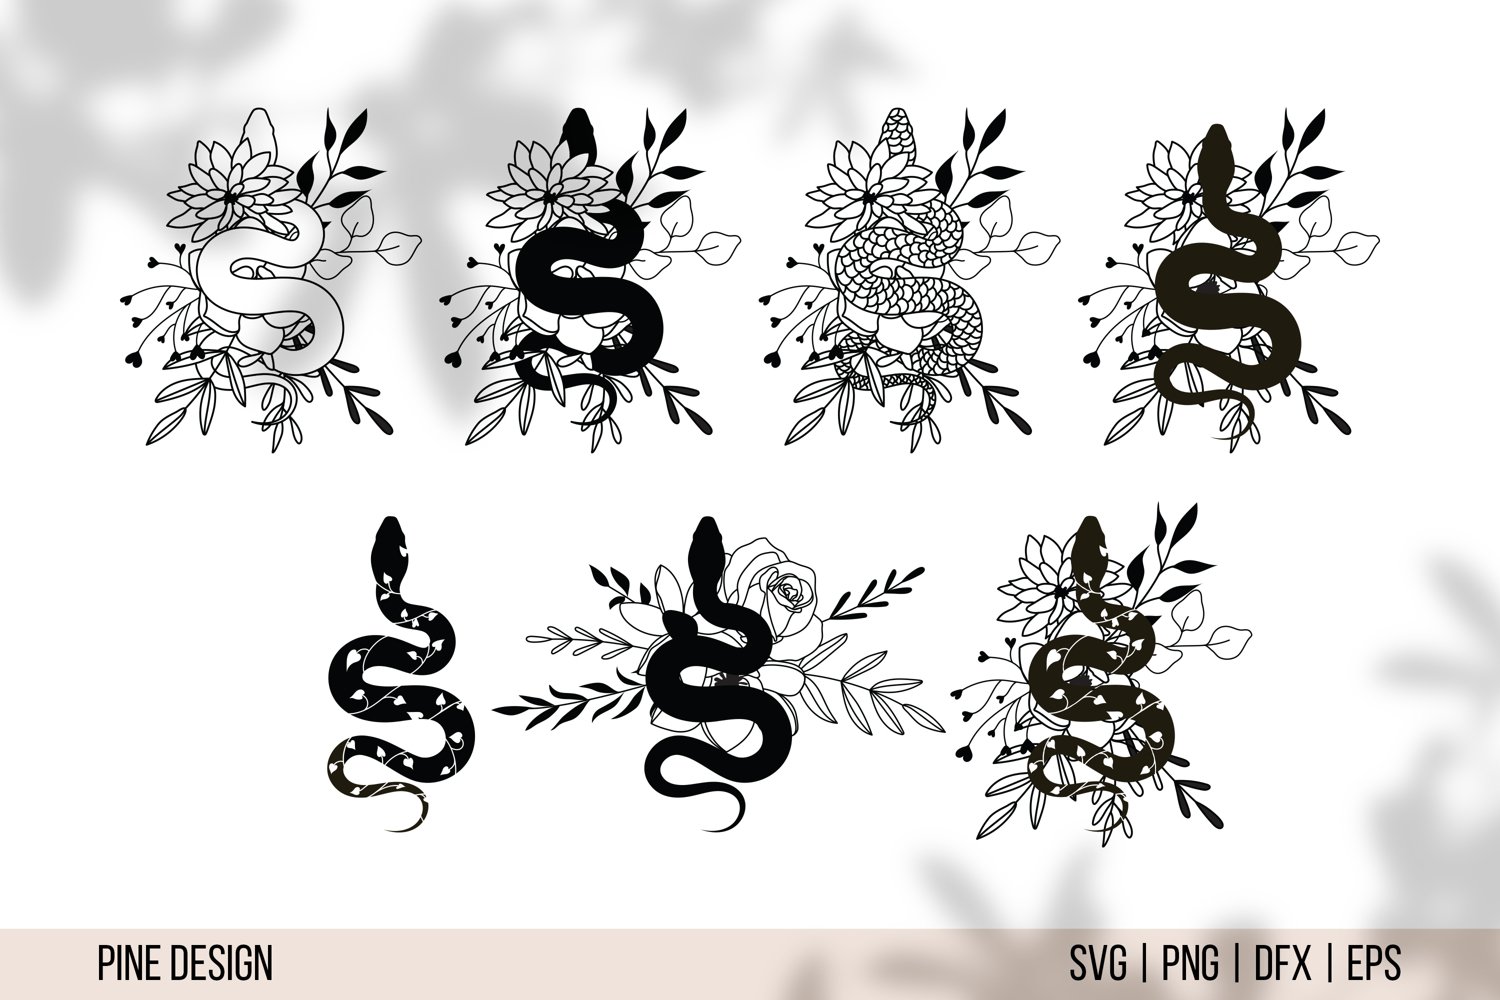 Set of six black and white images of flowers and snakes.